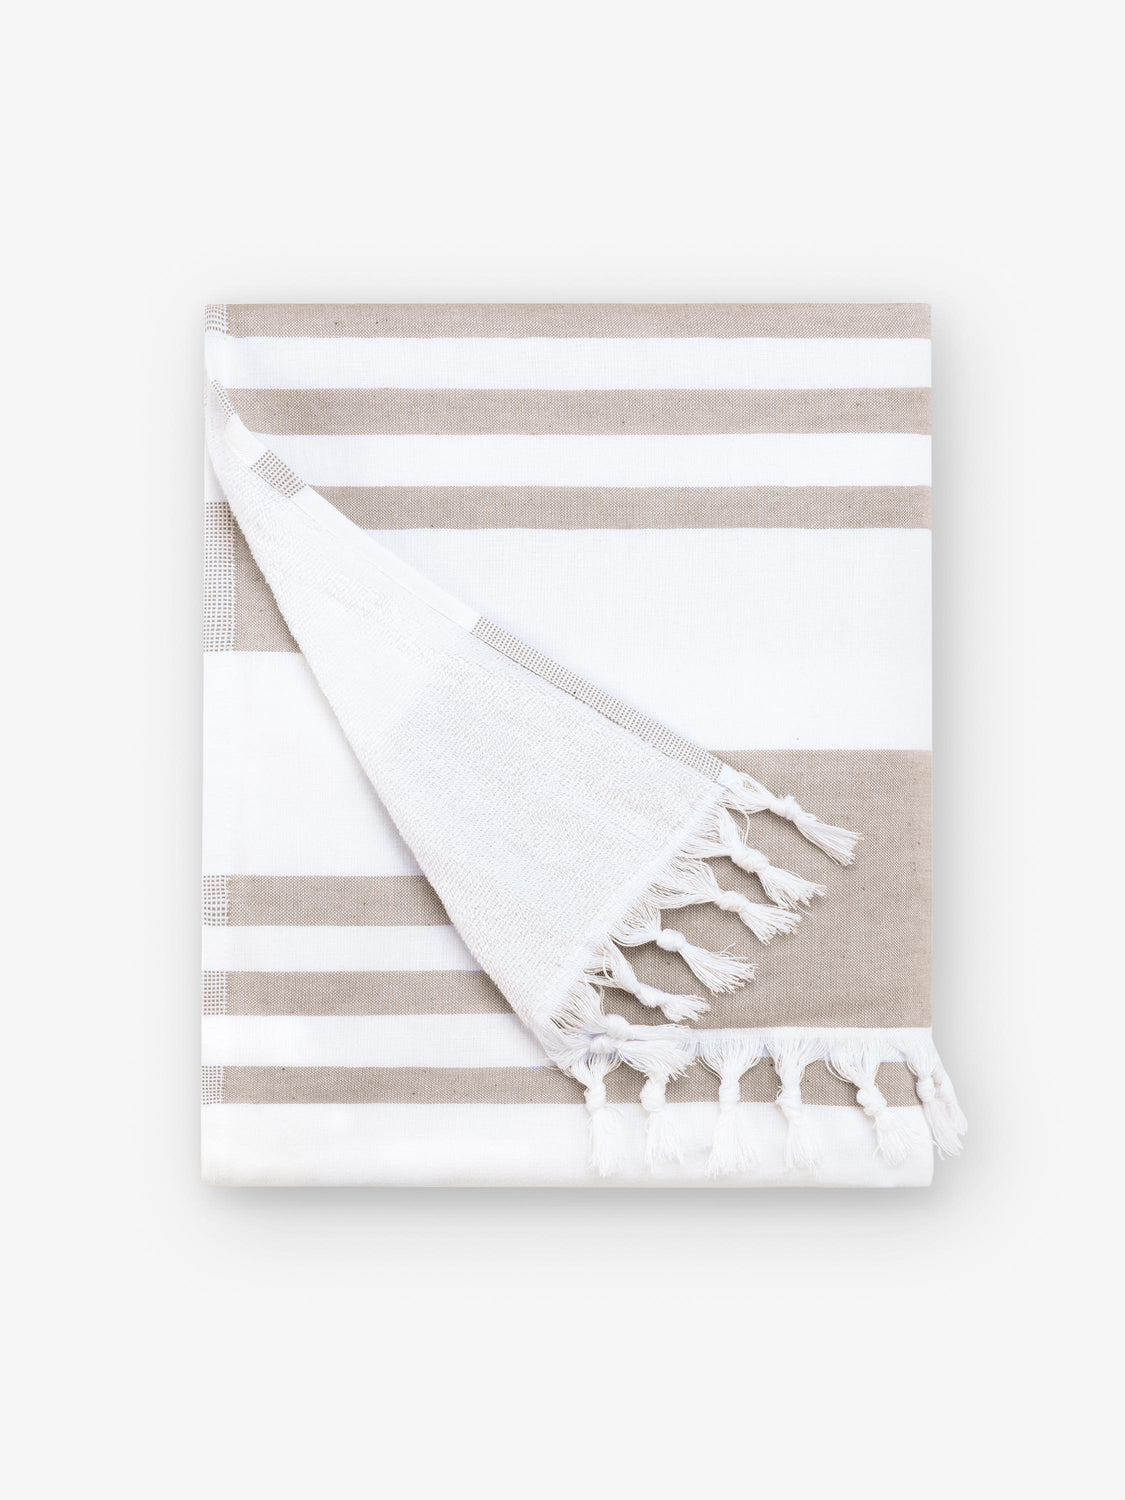 A folded tan and white striped Turkish towel with white fringe. 